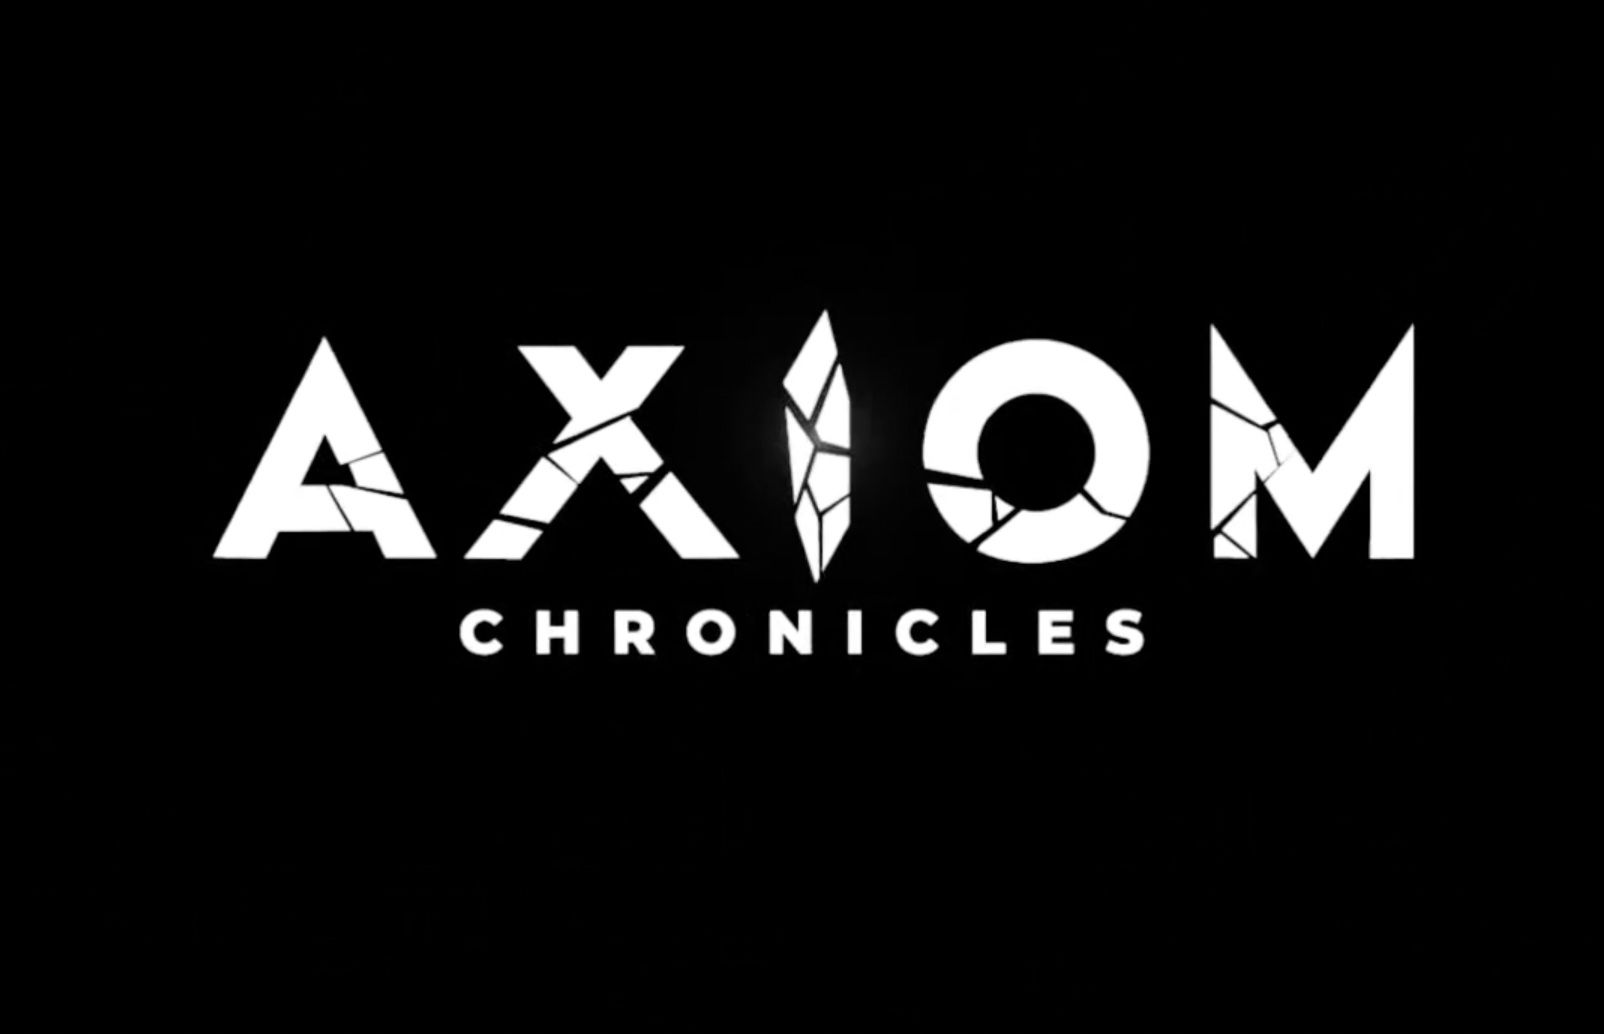 "The Axiom Chronicles" Scratches the Kid's Sci-fi Animation Itch, With Satisfying Verve